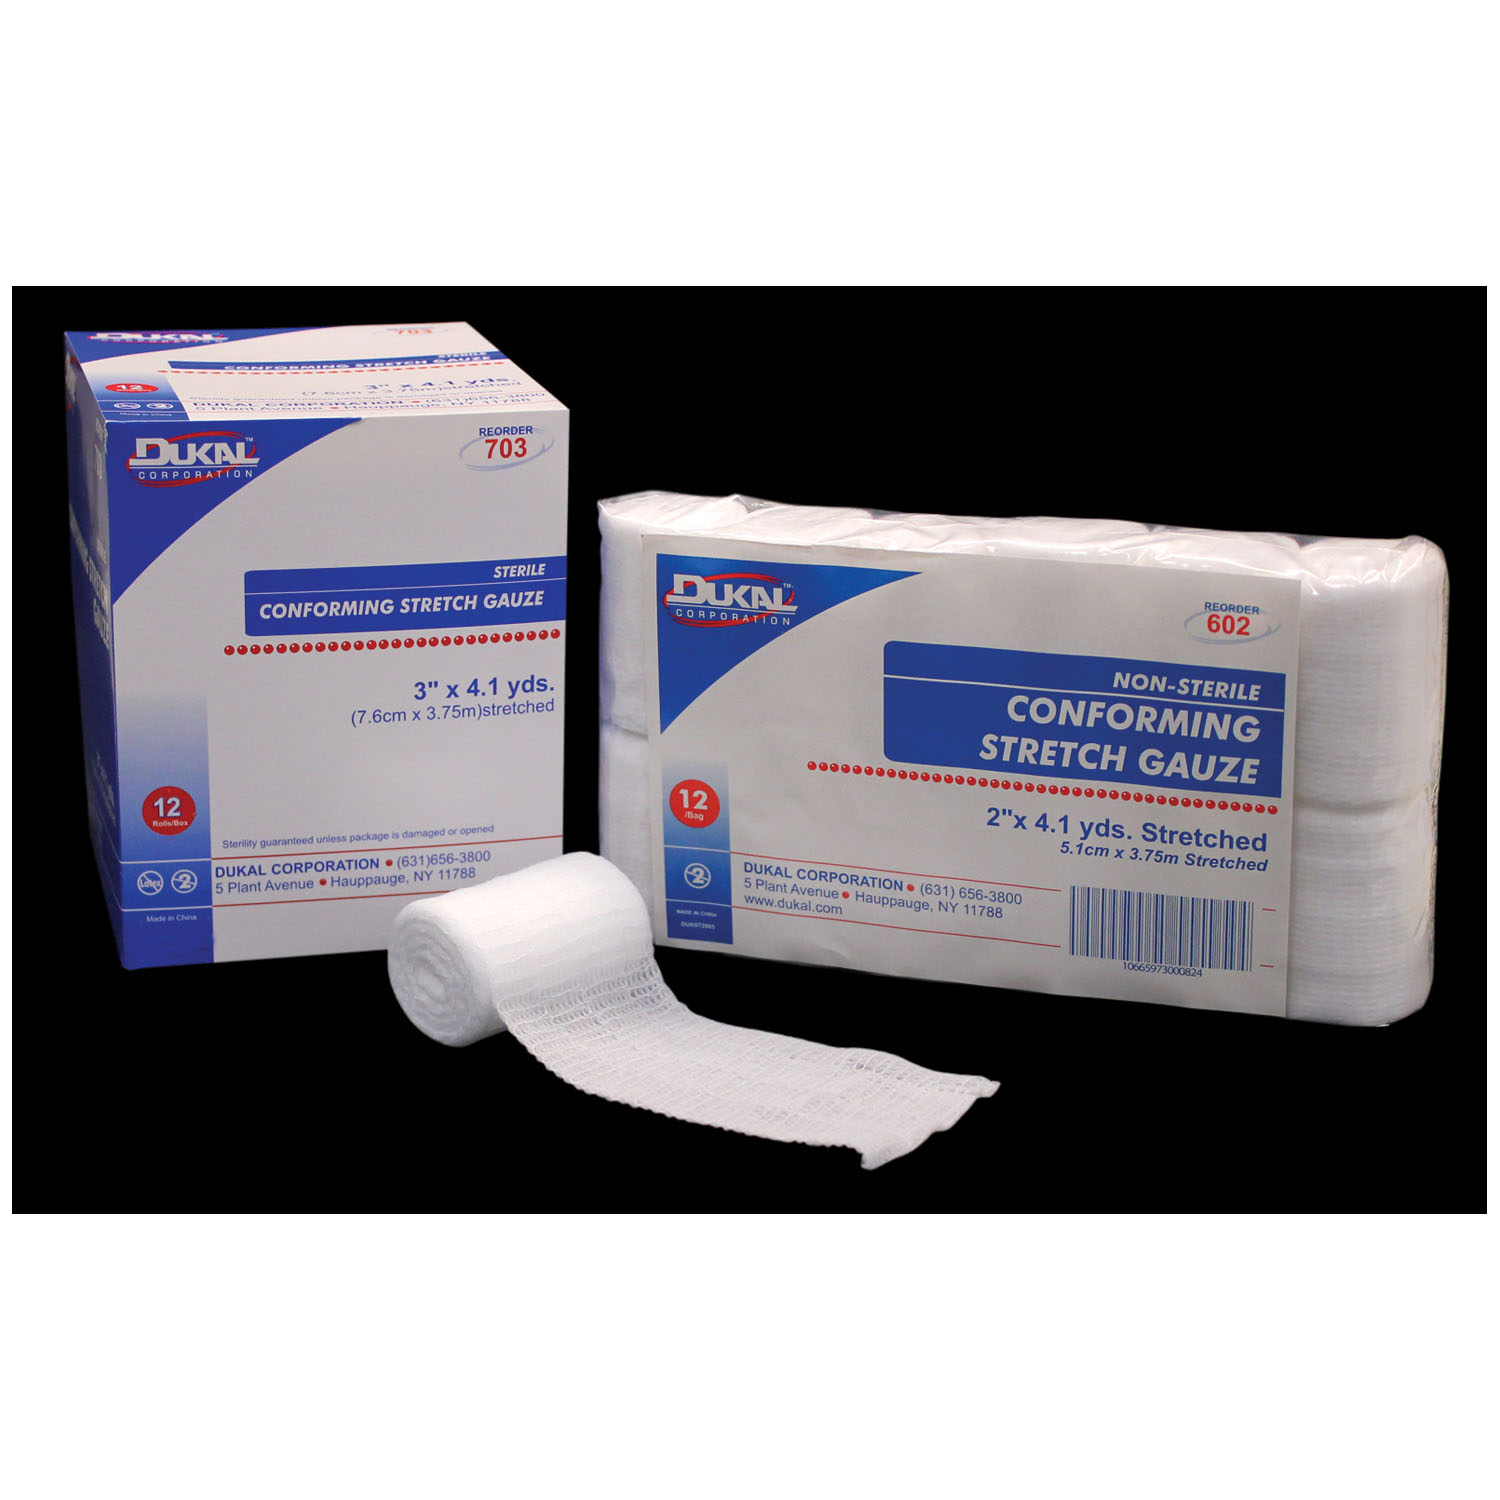 DUKAL CONFORMING STRETCH GAUZE : 703 BX $6.50 Stocked